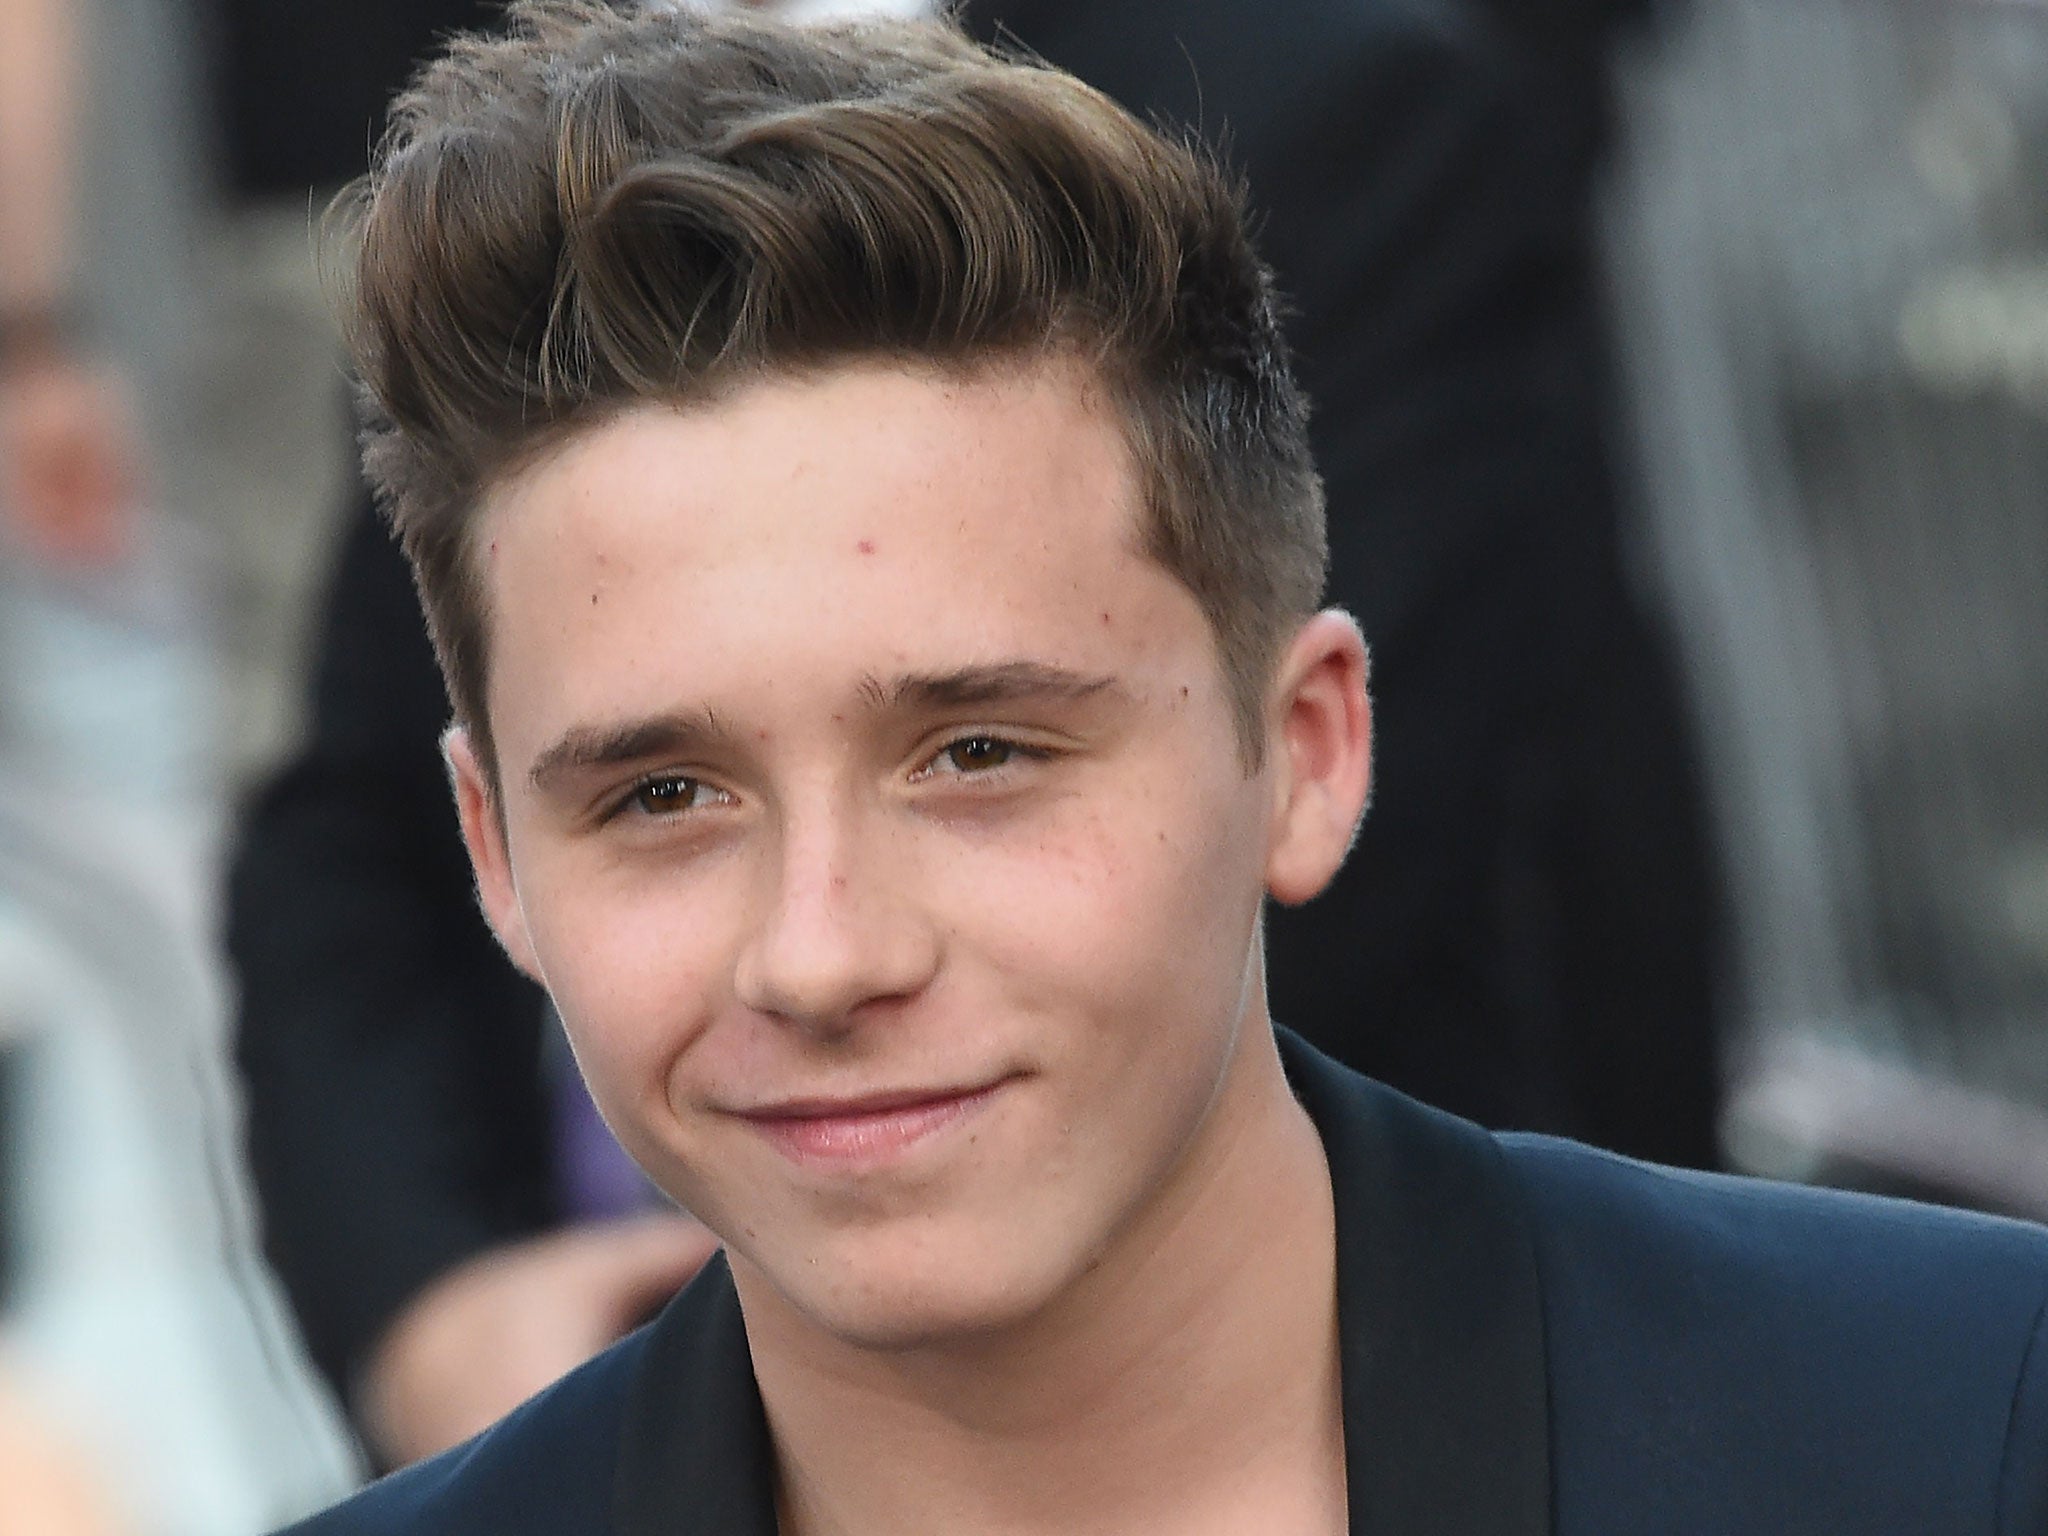 Brooklyn Beckham pictured at a film premiere in America during the summer